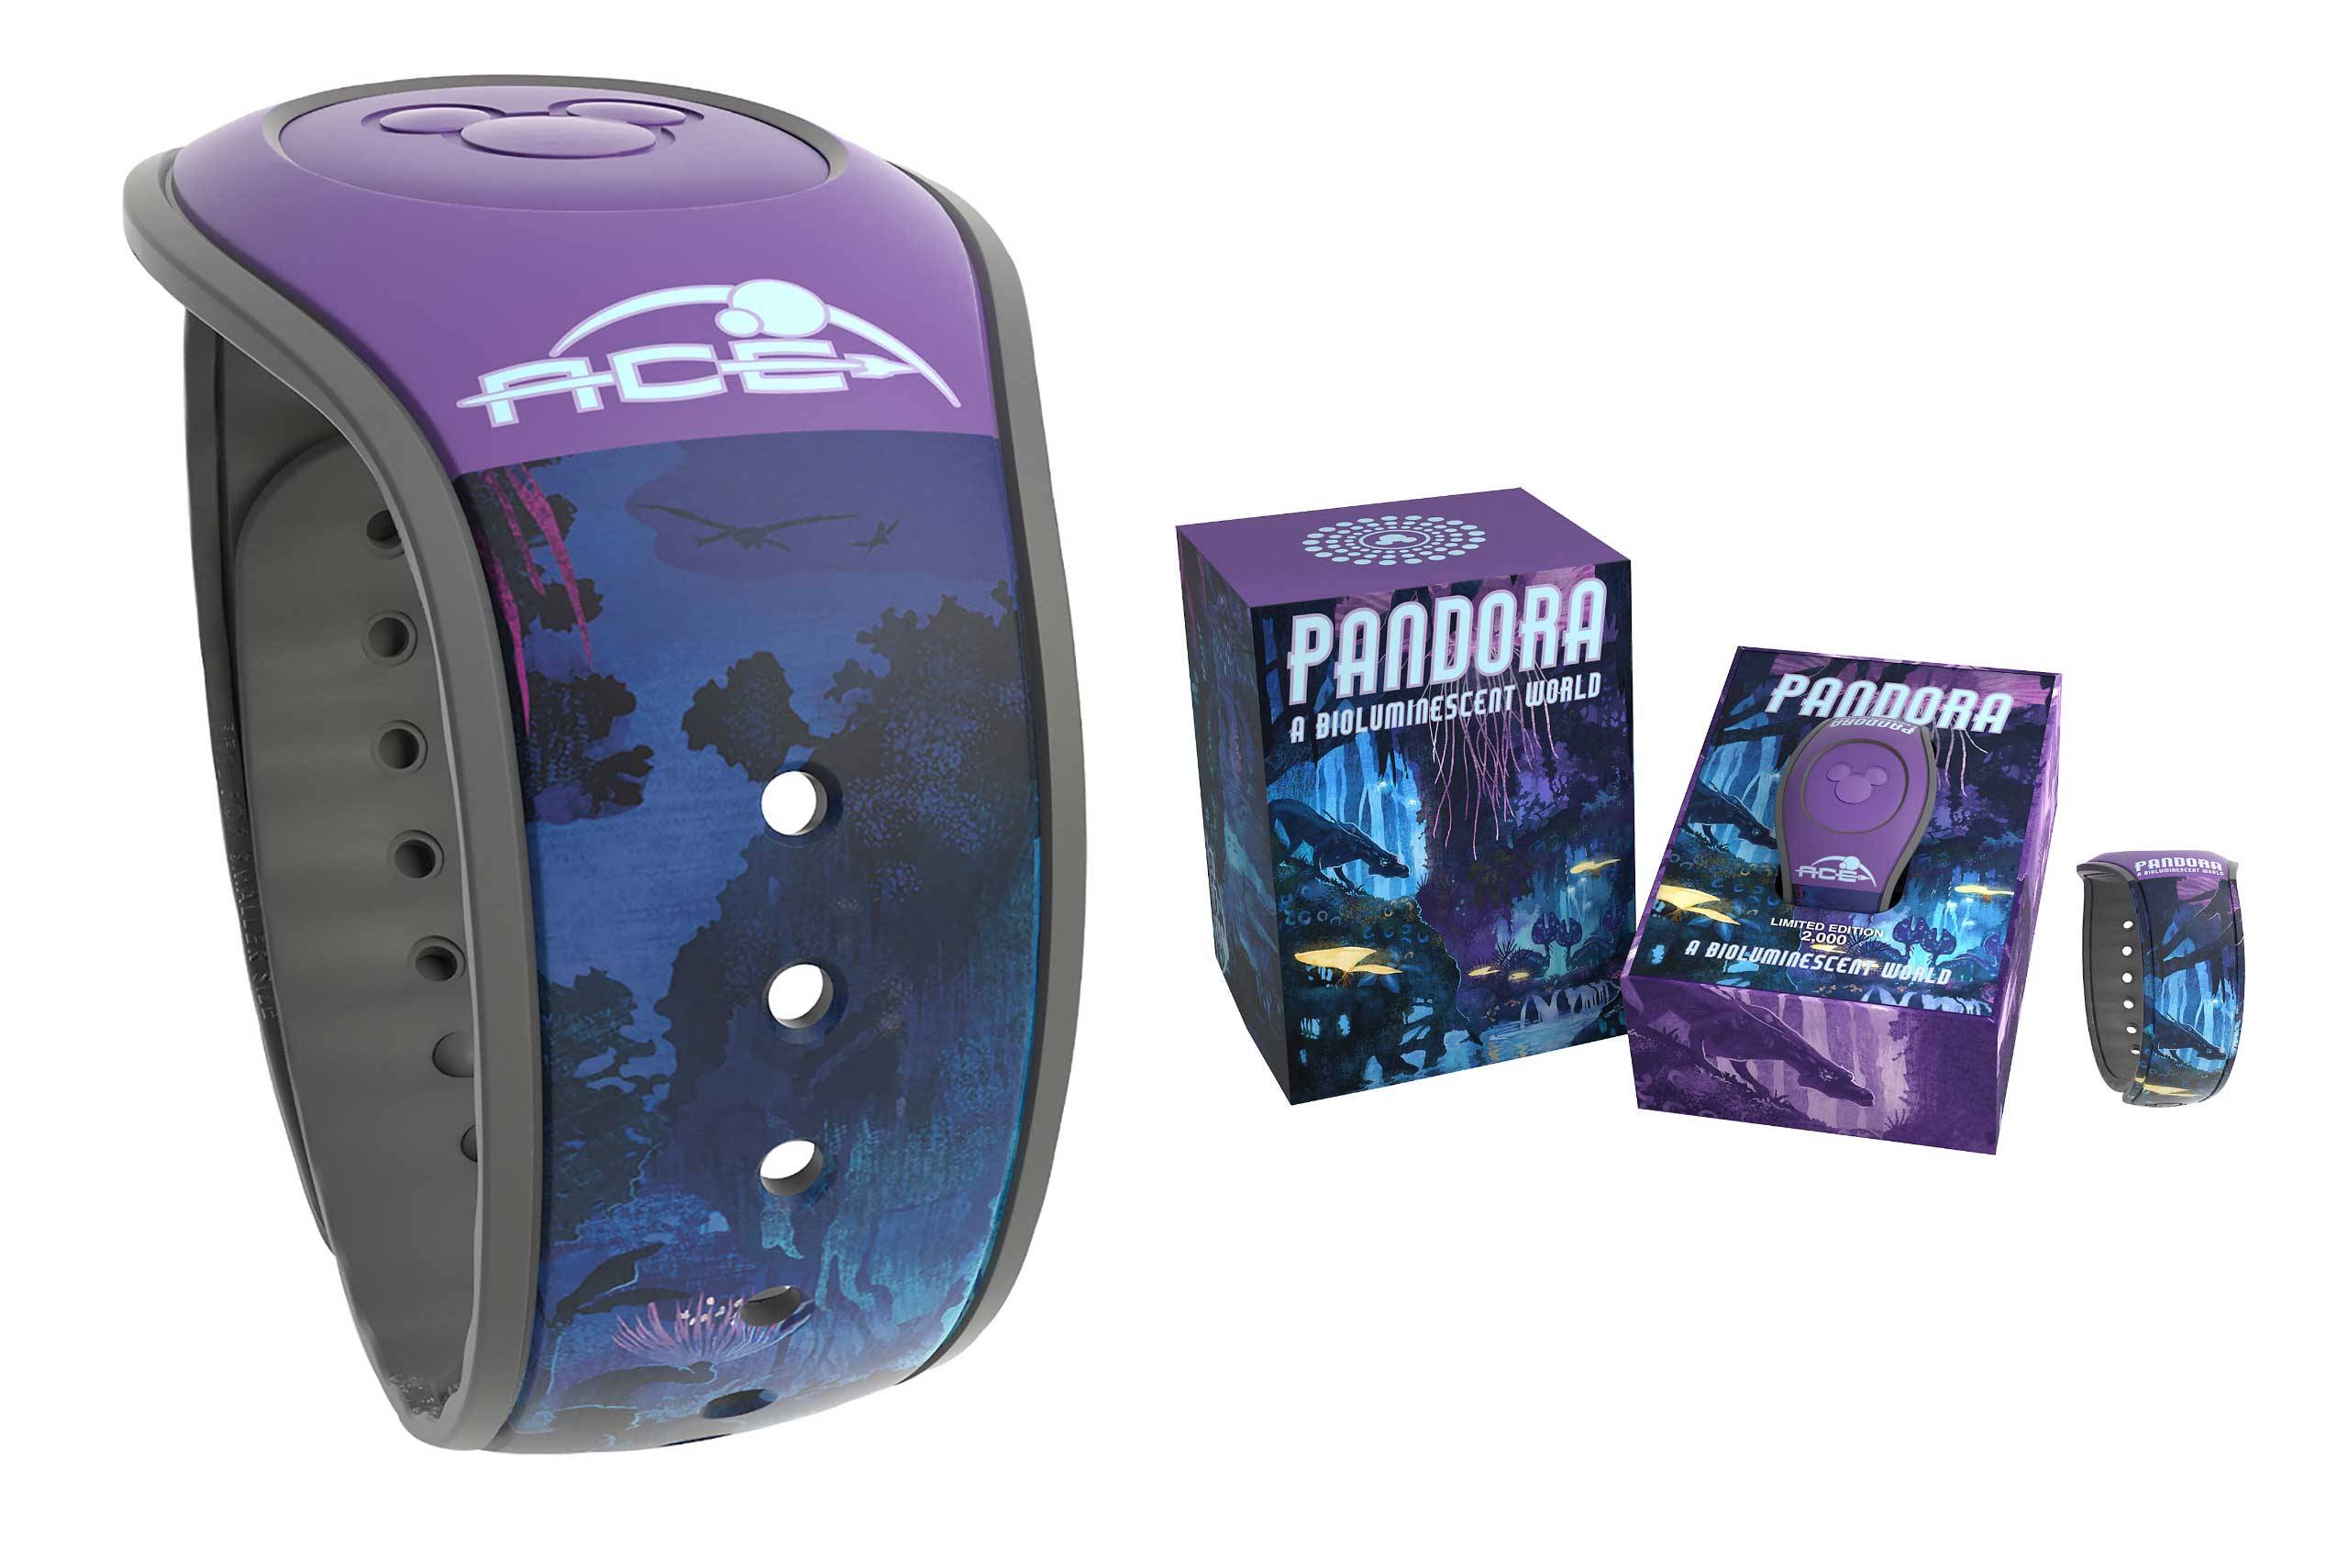 PHOTO - Pandora Limited Edition MagicBand now on sale